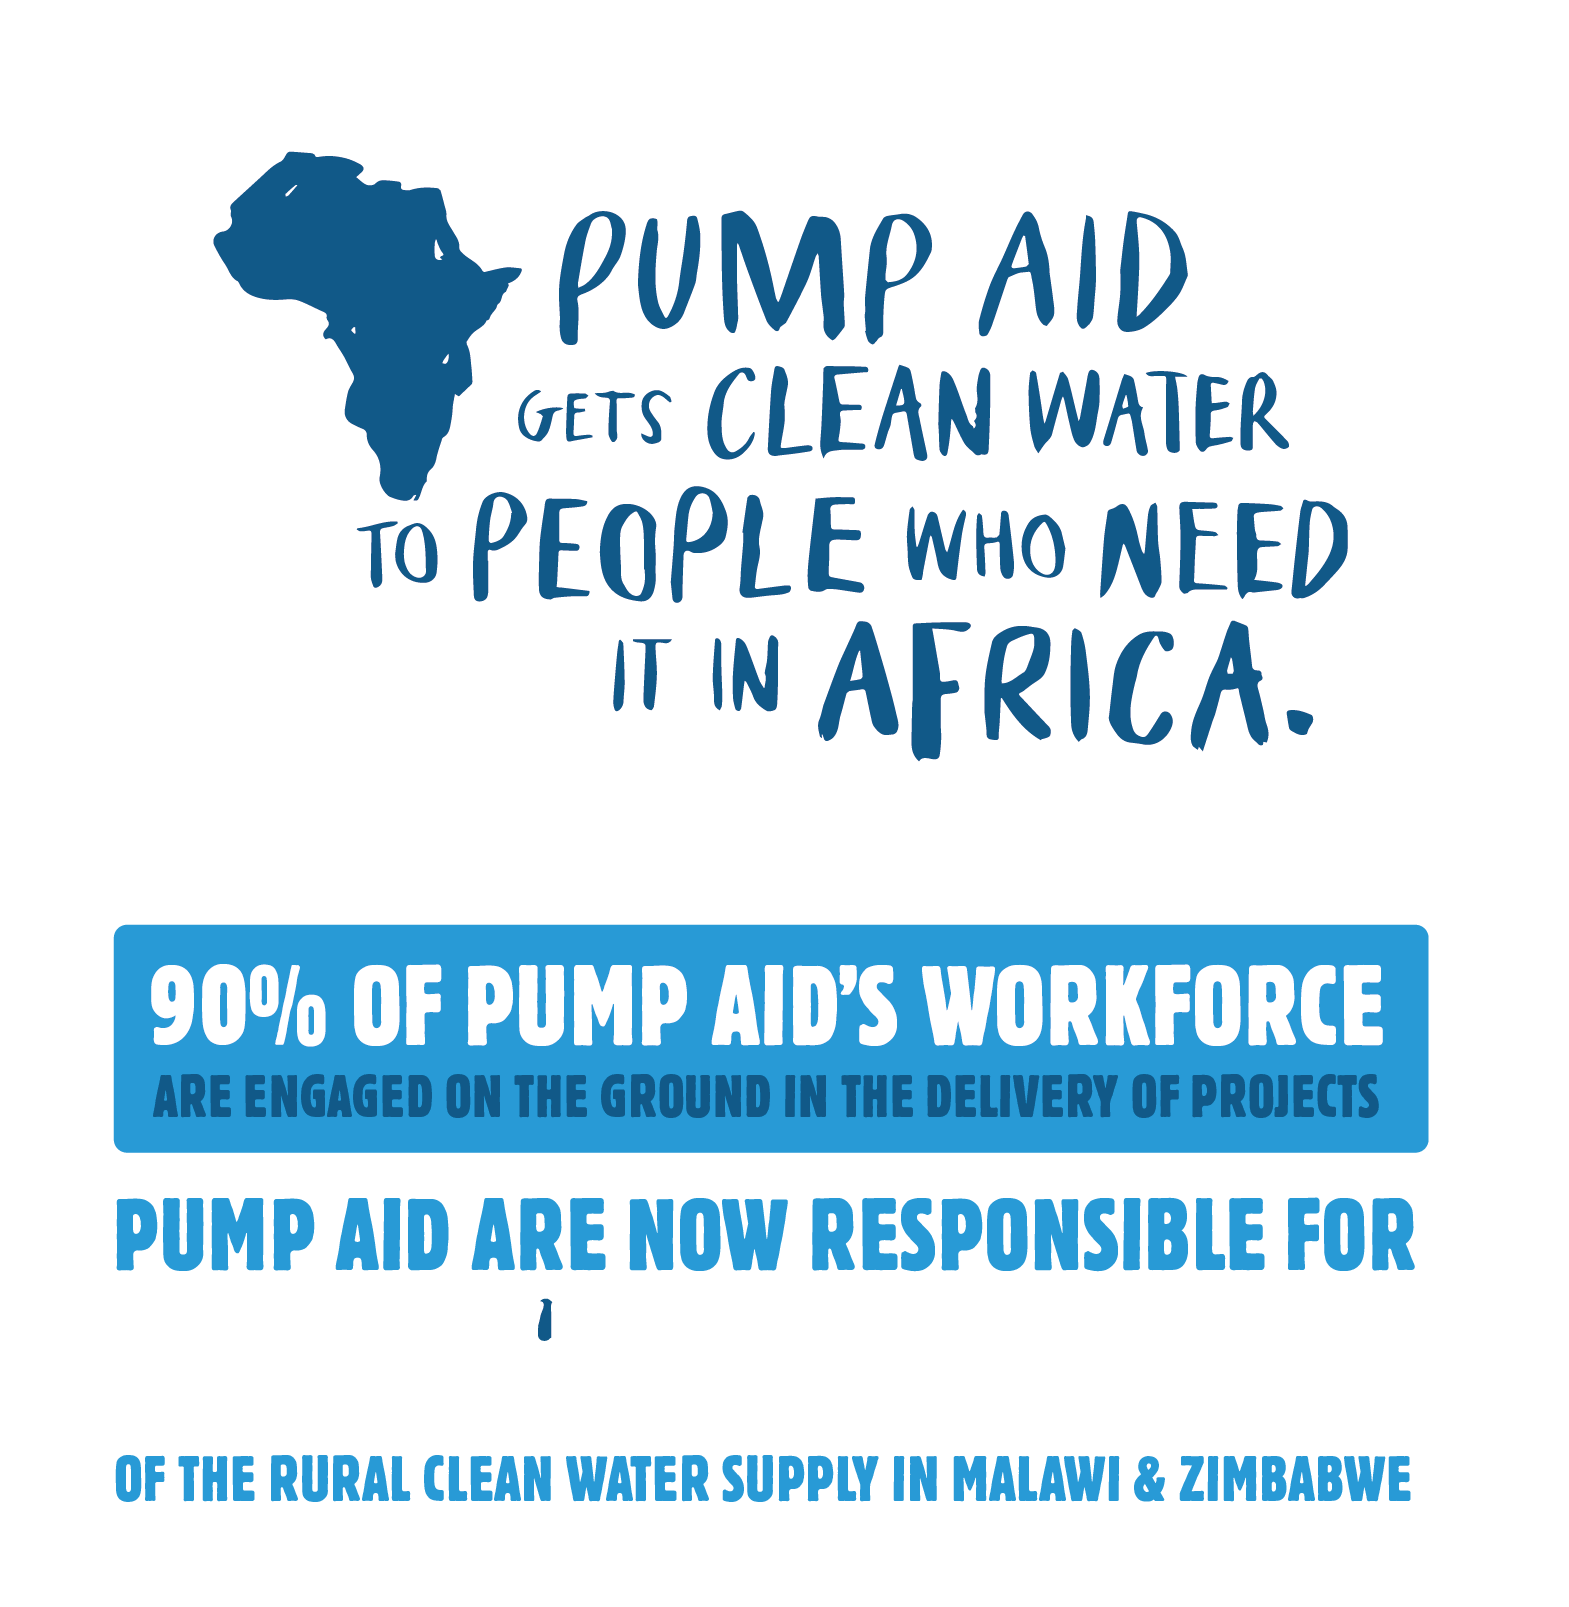 Pump Aid gets clean water to people who need it in Africa. 90% of Pump Aid's workforce are engaged on the ground in the delivery of projects. Pump Aid are now responsible for suppyling over 10% of the rural clean water supply in Malawi & Zimbabwe.